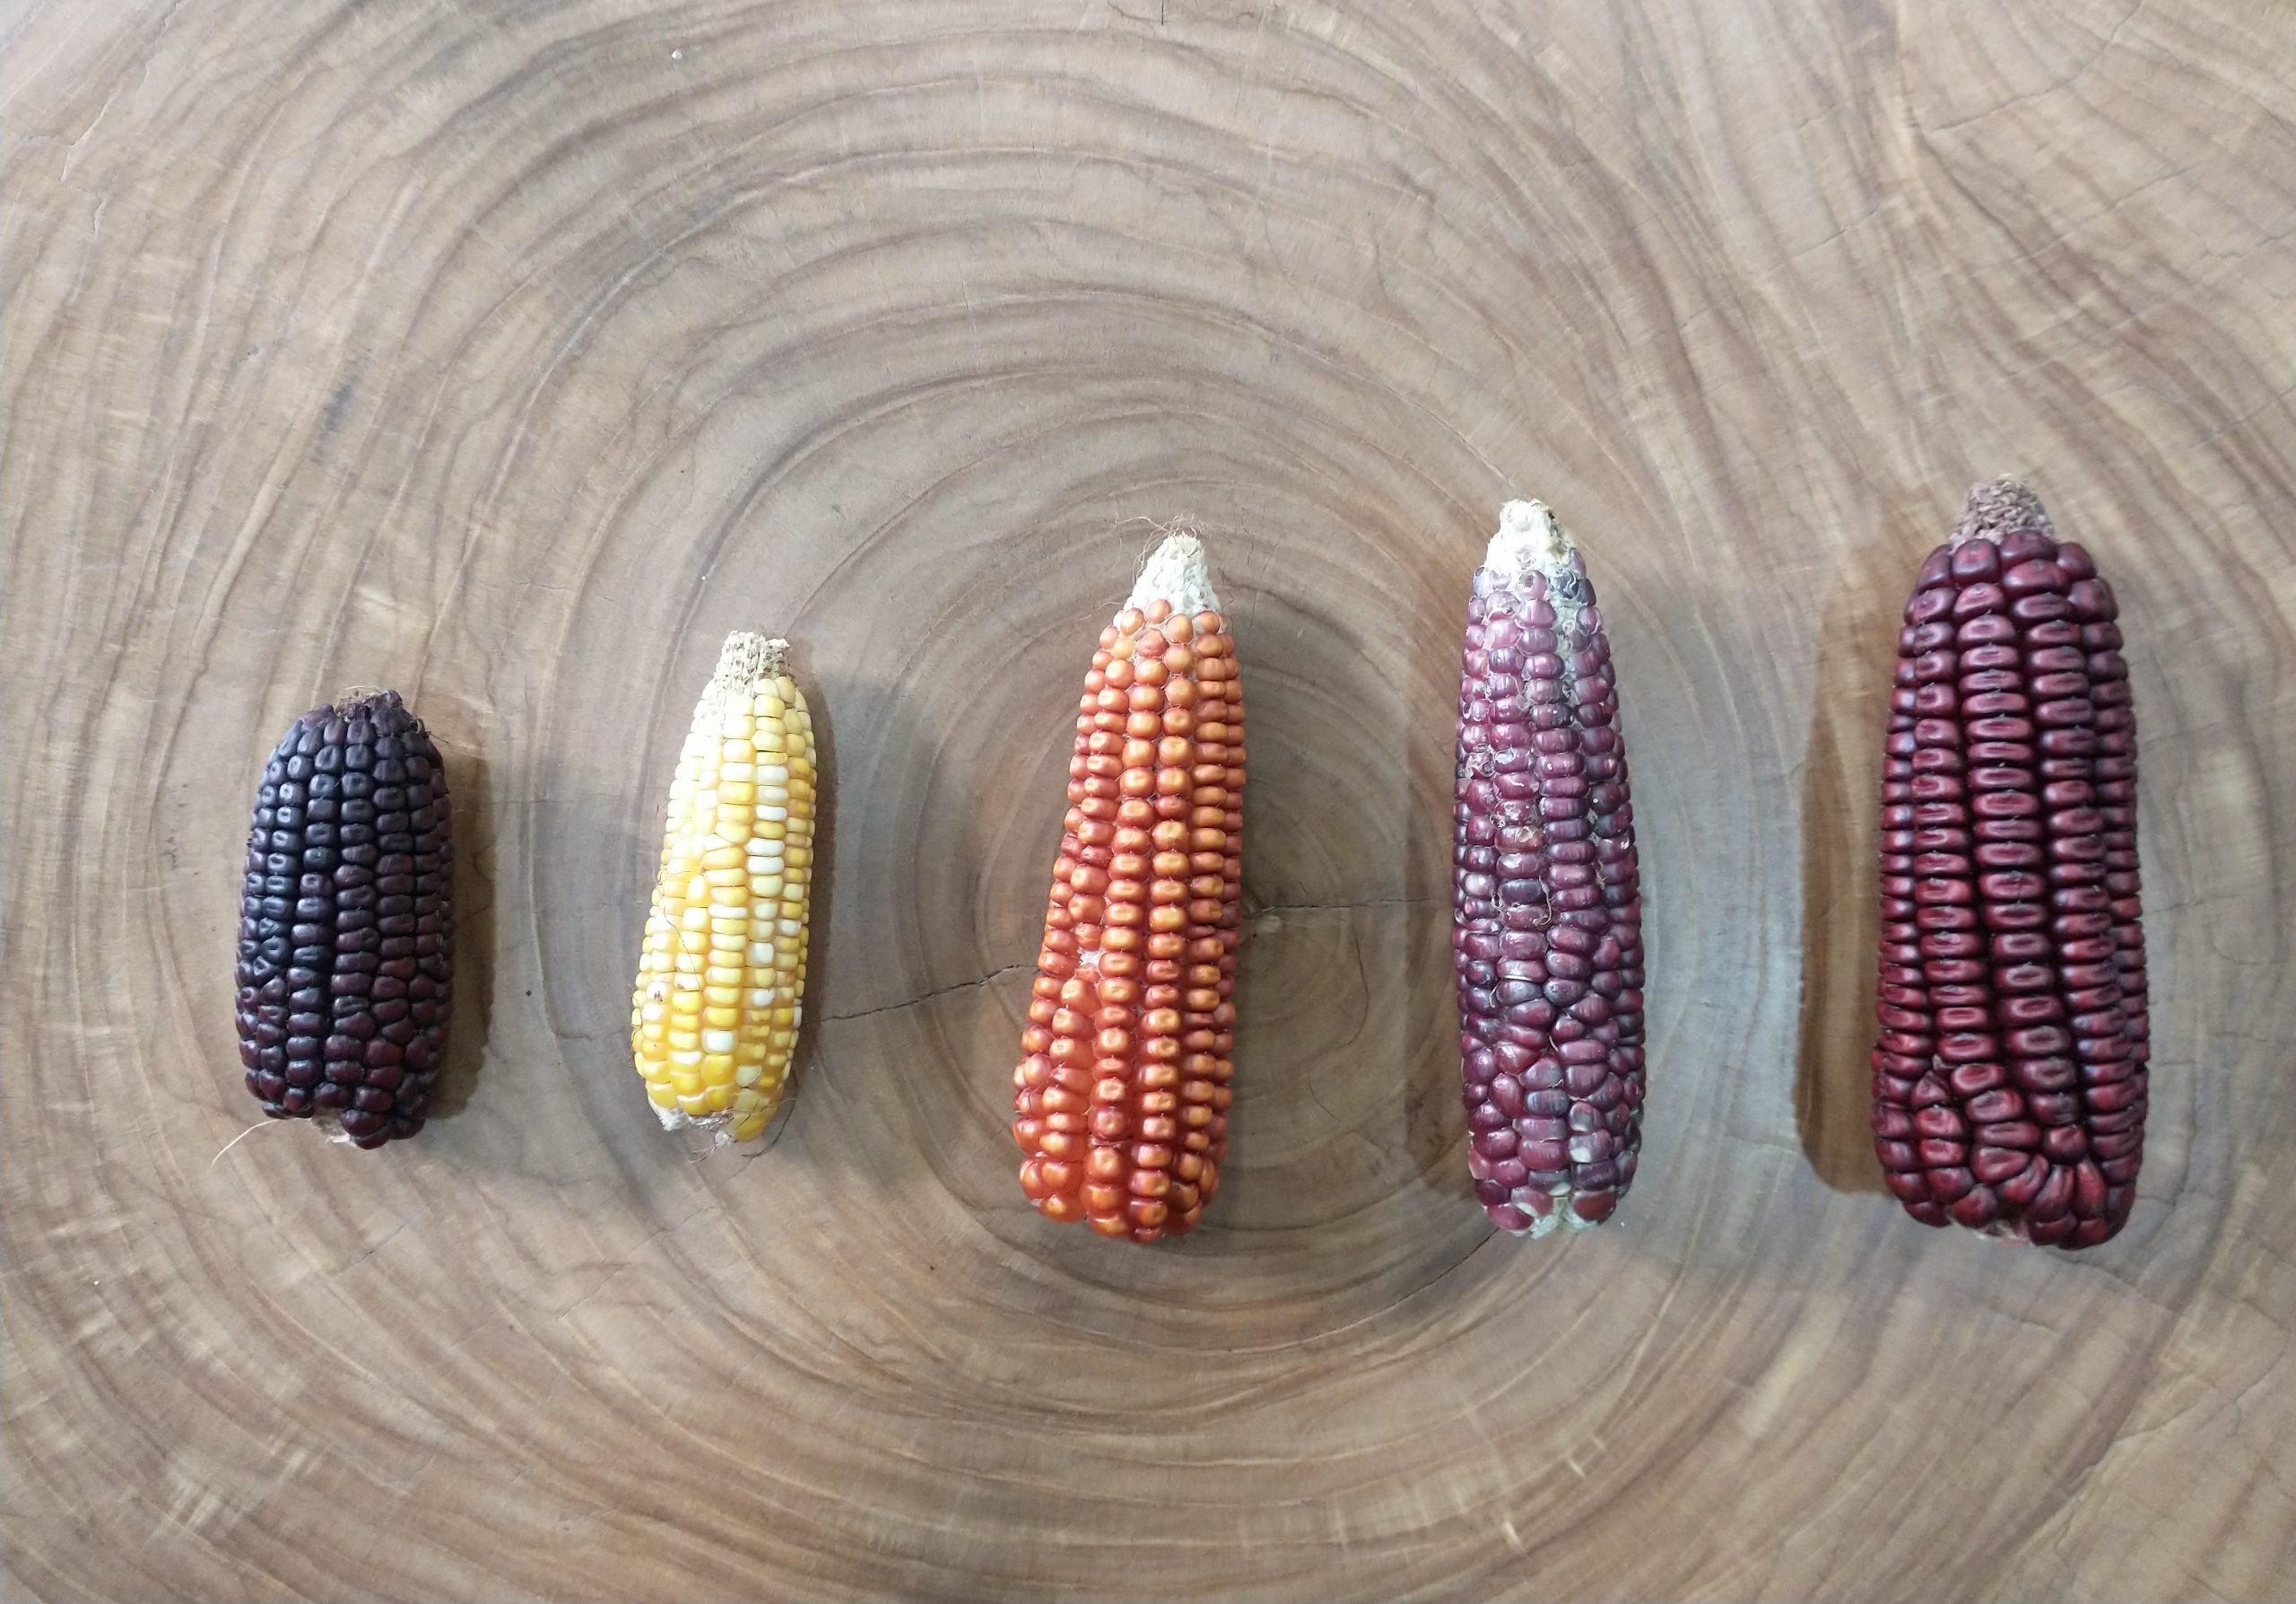 5 varieties of Gallito (little rooster) maize